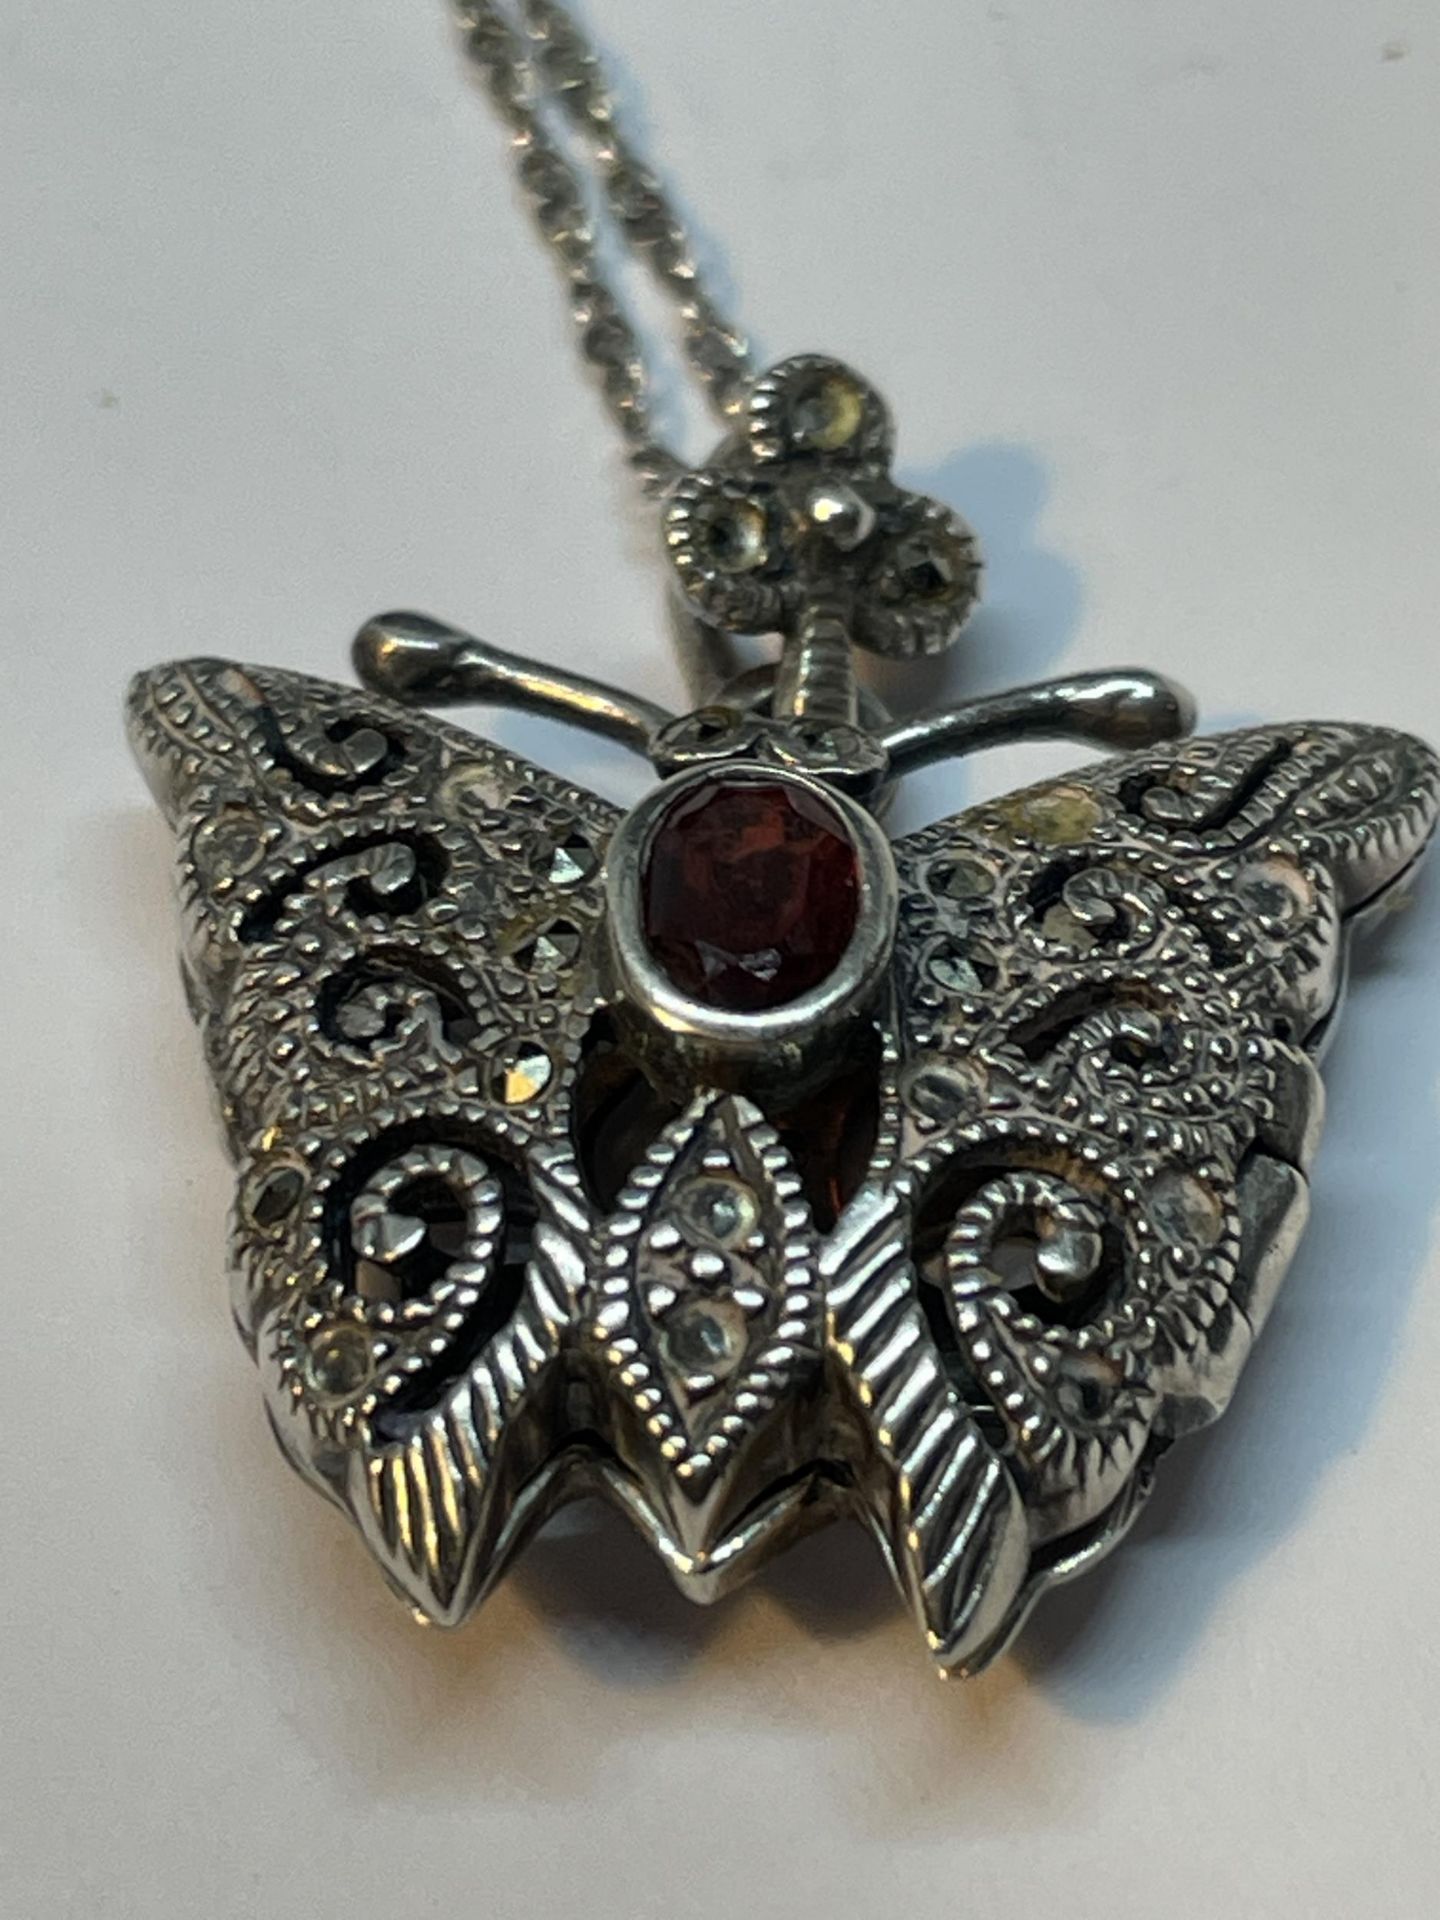 A MARKED 925 SILVER ORNATE BUTTERFLY LOCKET ON A CHAIN - Image 2 of 4